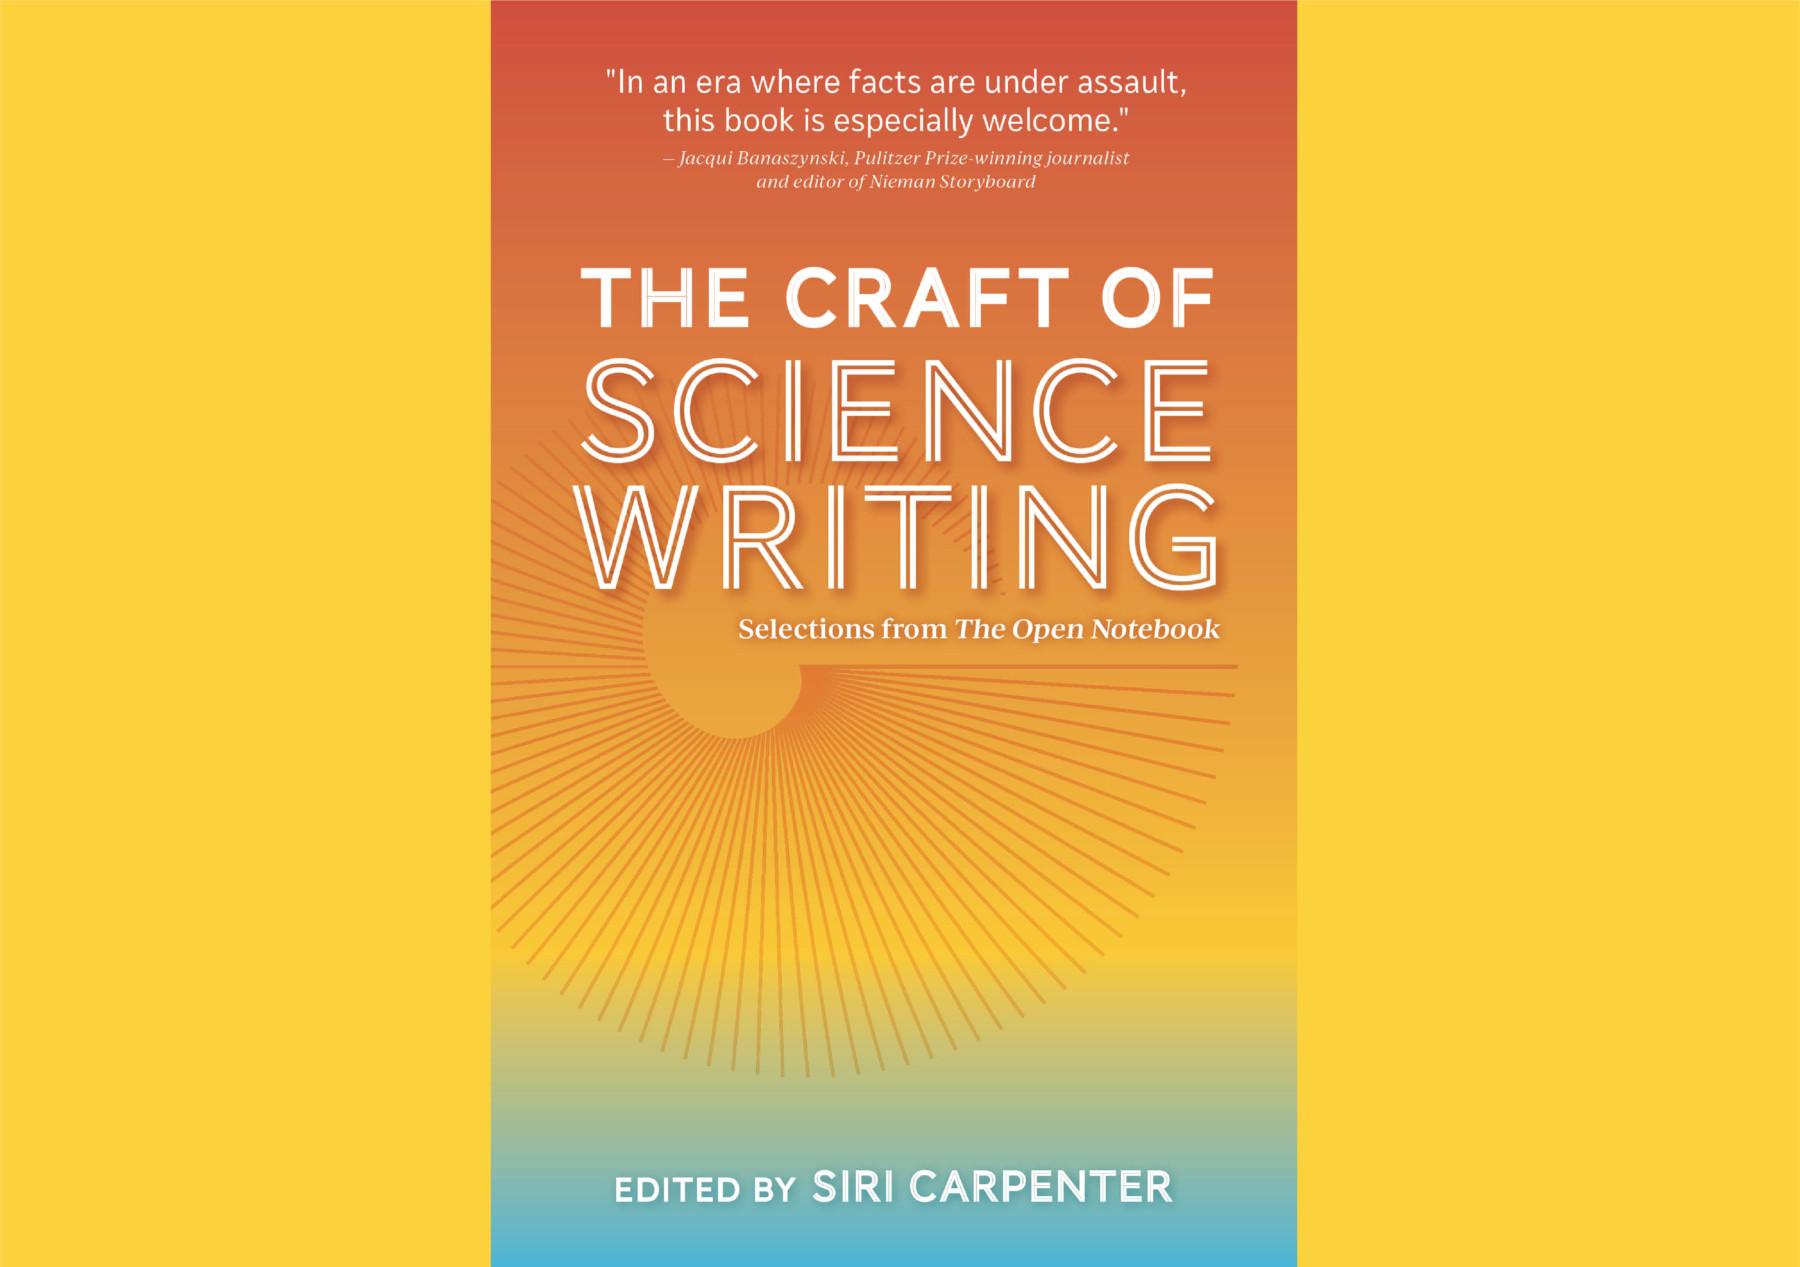 The Open Notebook Craft of Science Writing